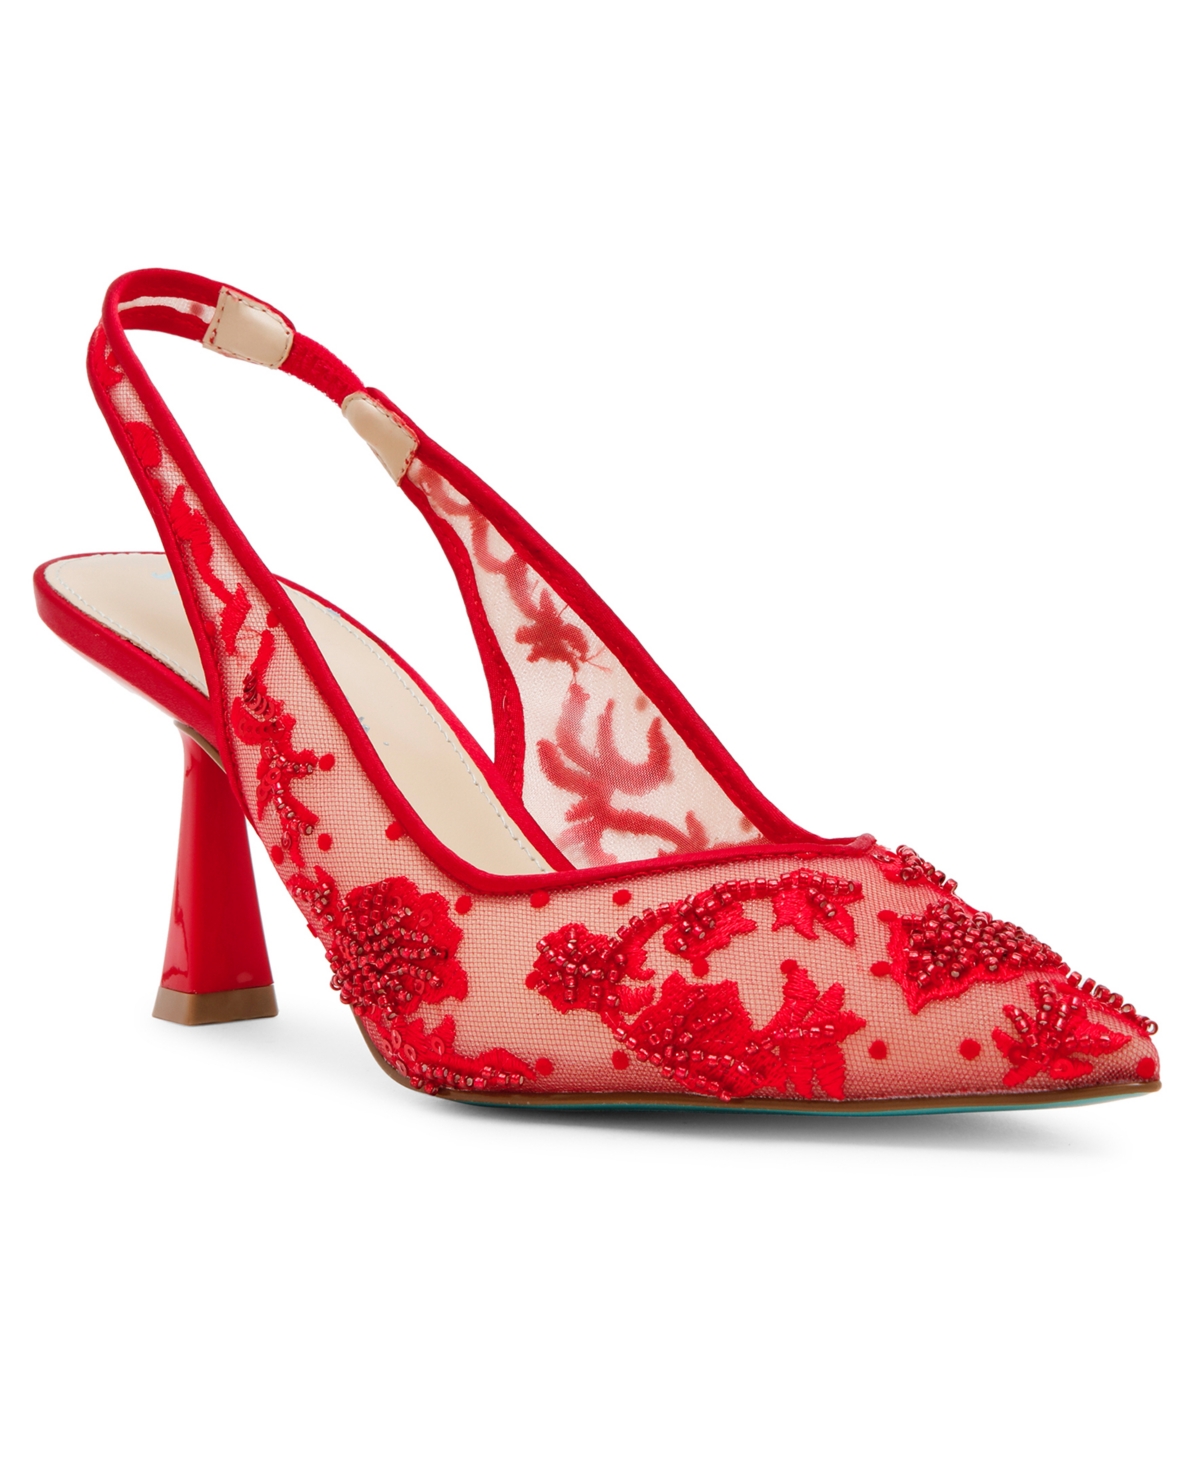 Women's Nikki Embroidered Slingback Evening Pumps - Red